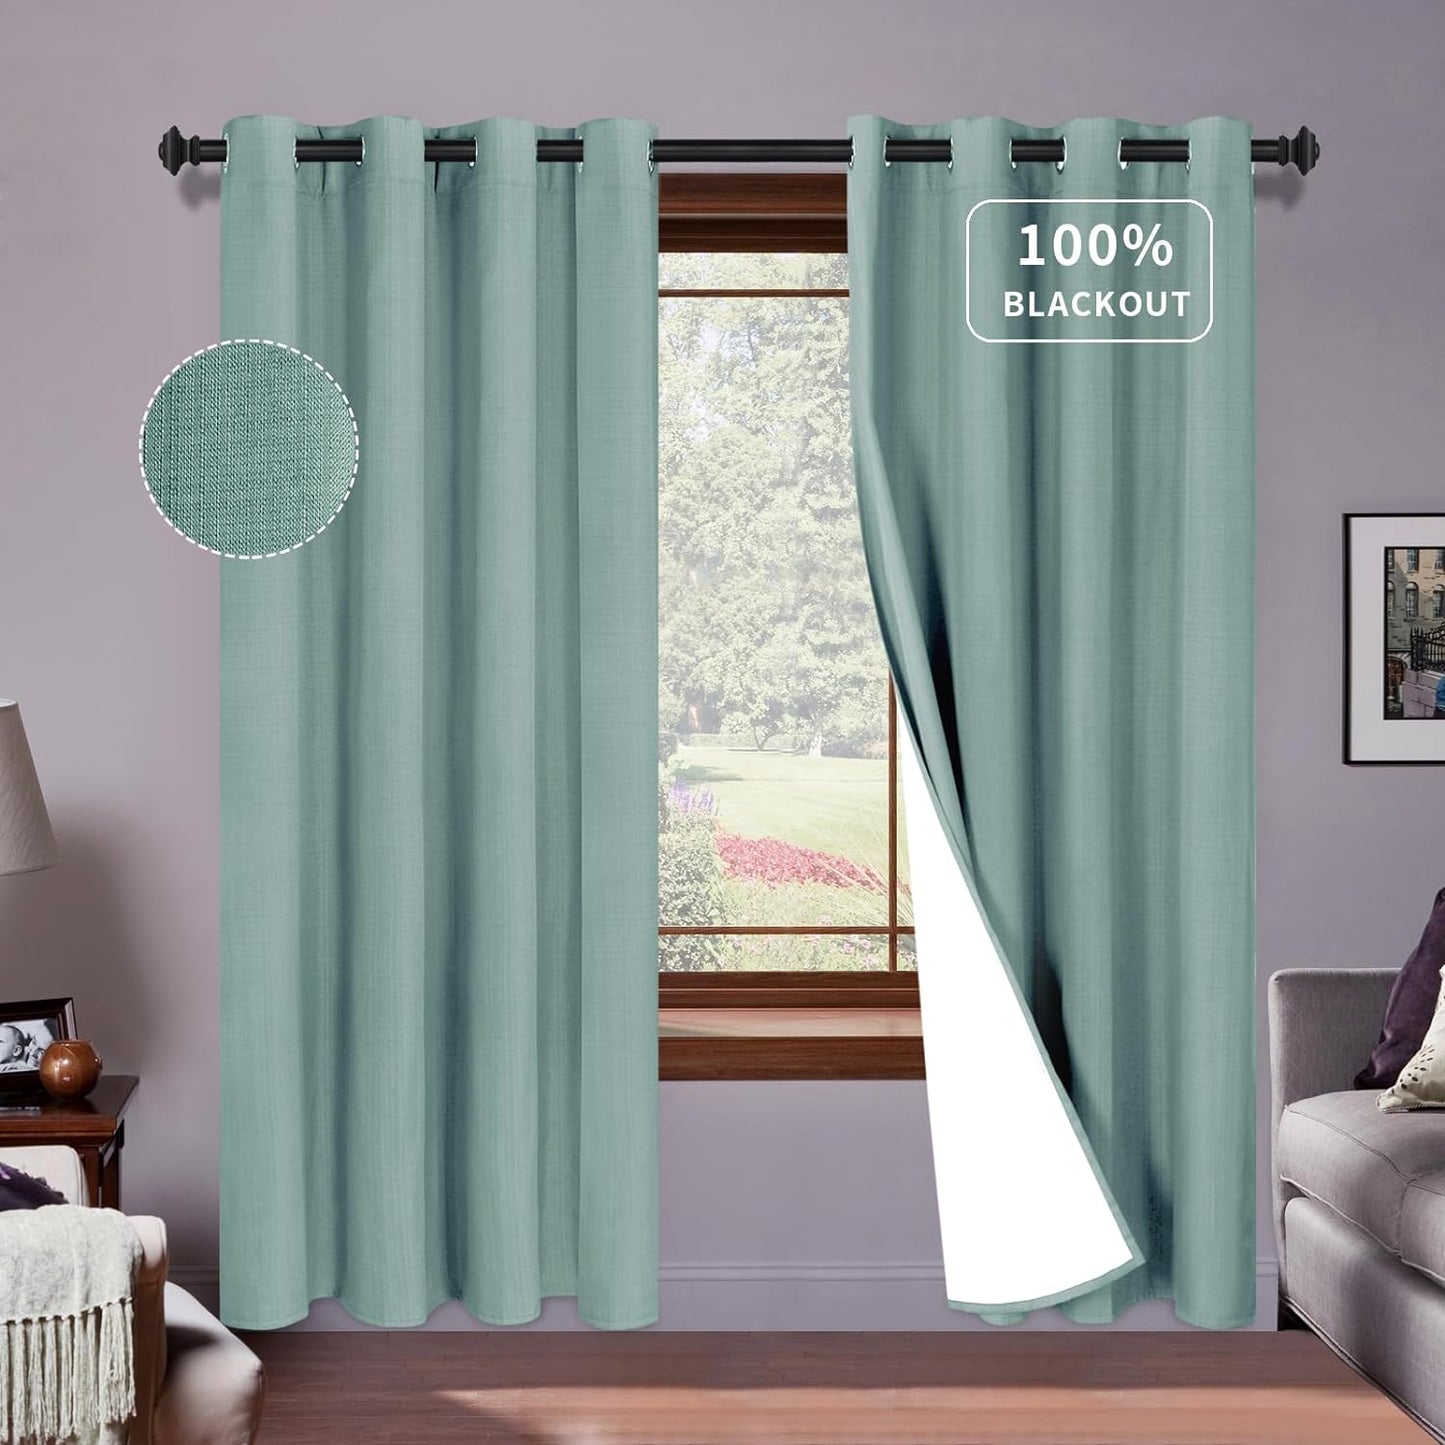 Purefit White Linen Blackout Curtains 84 Inches Long 100% Room Darkening Thermal Insulated Window Curtain Drapes for Bedroom Living Room Nursery with Anti-Rust Grommets & Energy Saving Liner, 2 Panels  PureFit Dusk Blue 52"W X 84"L 